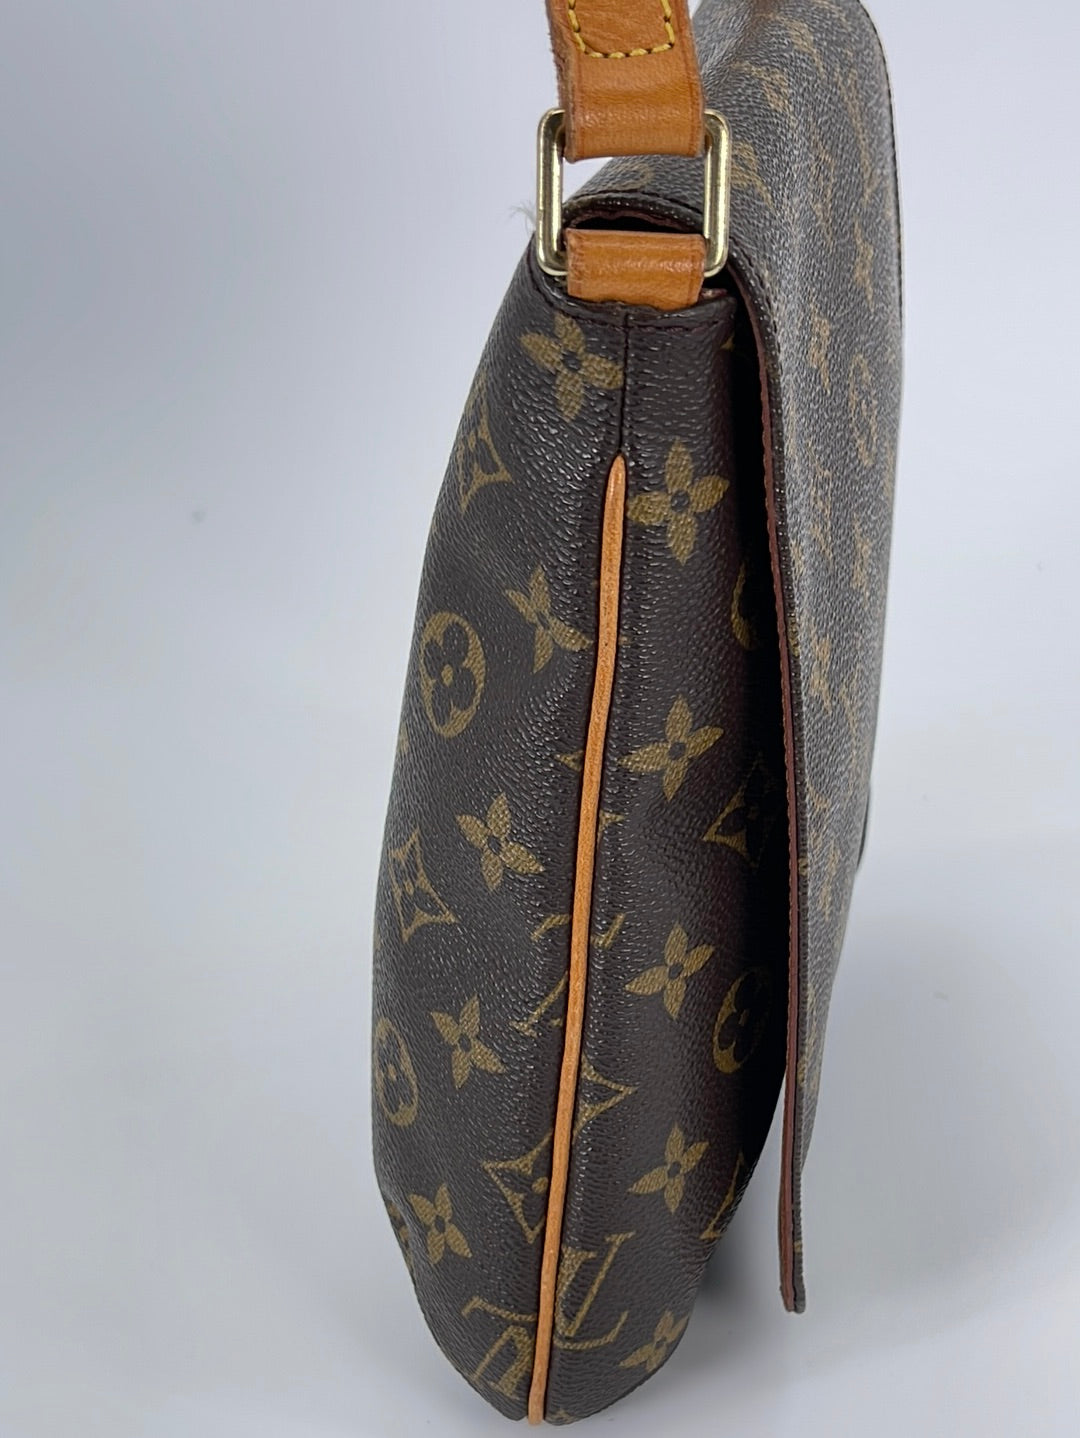 Louis Vuitton Salsa Women's Authentic Pre Owned Custom Painted Crossbody Bag Adustable Strap Brown, Gray, Pink Luxury Monogram Canvas